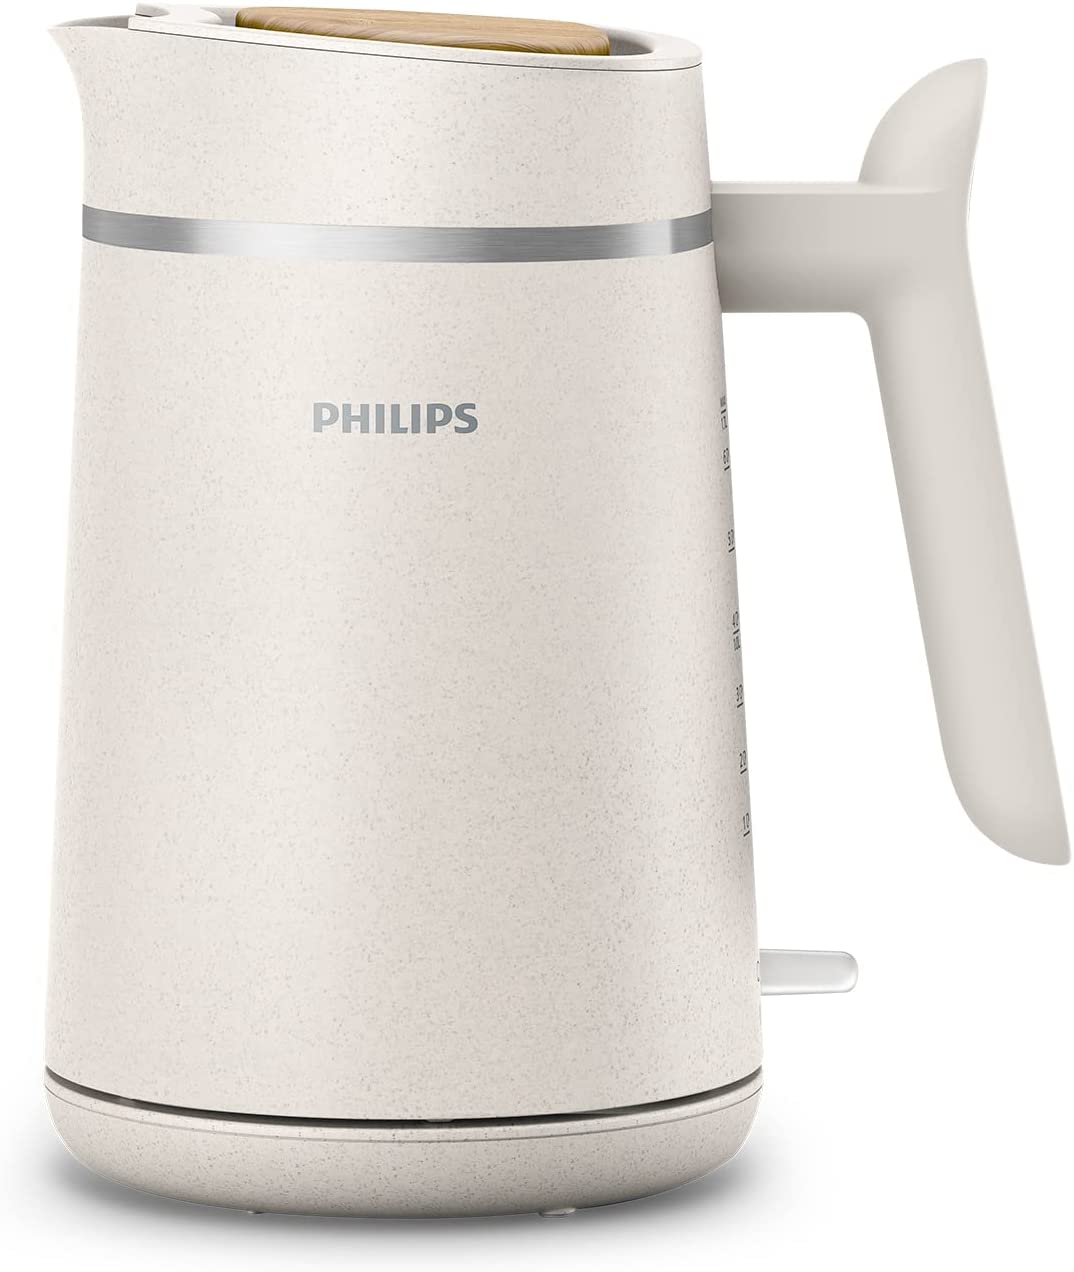 Philips Domestic Appliances Philips HD9365/10 Conscious Collection Kettle, Organic, 100% Recycled Plastic, Sustainable, 2200 Watt, 1.7 Litre Capacity, Cream